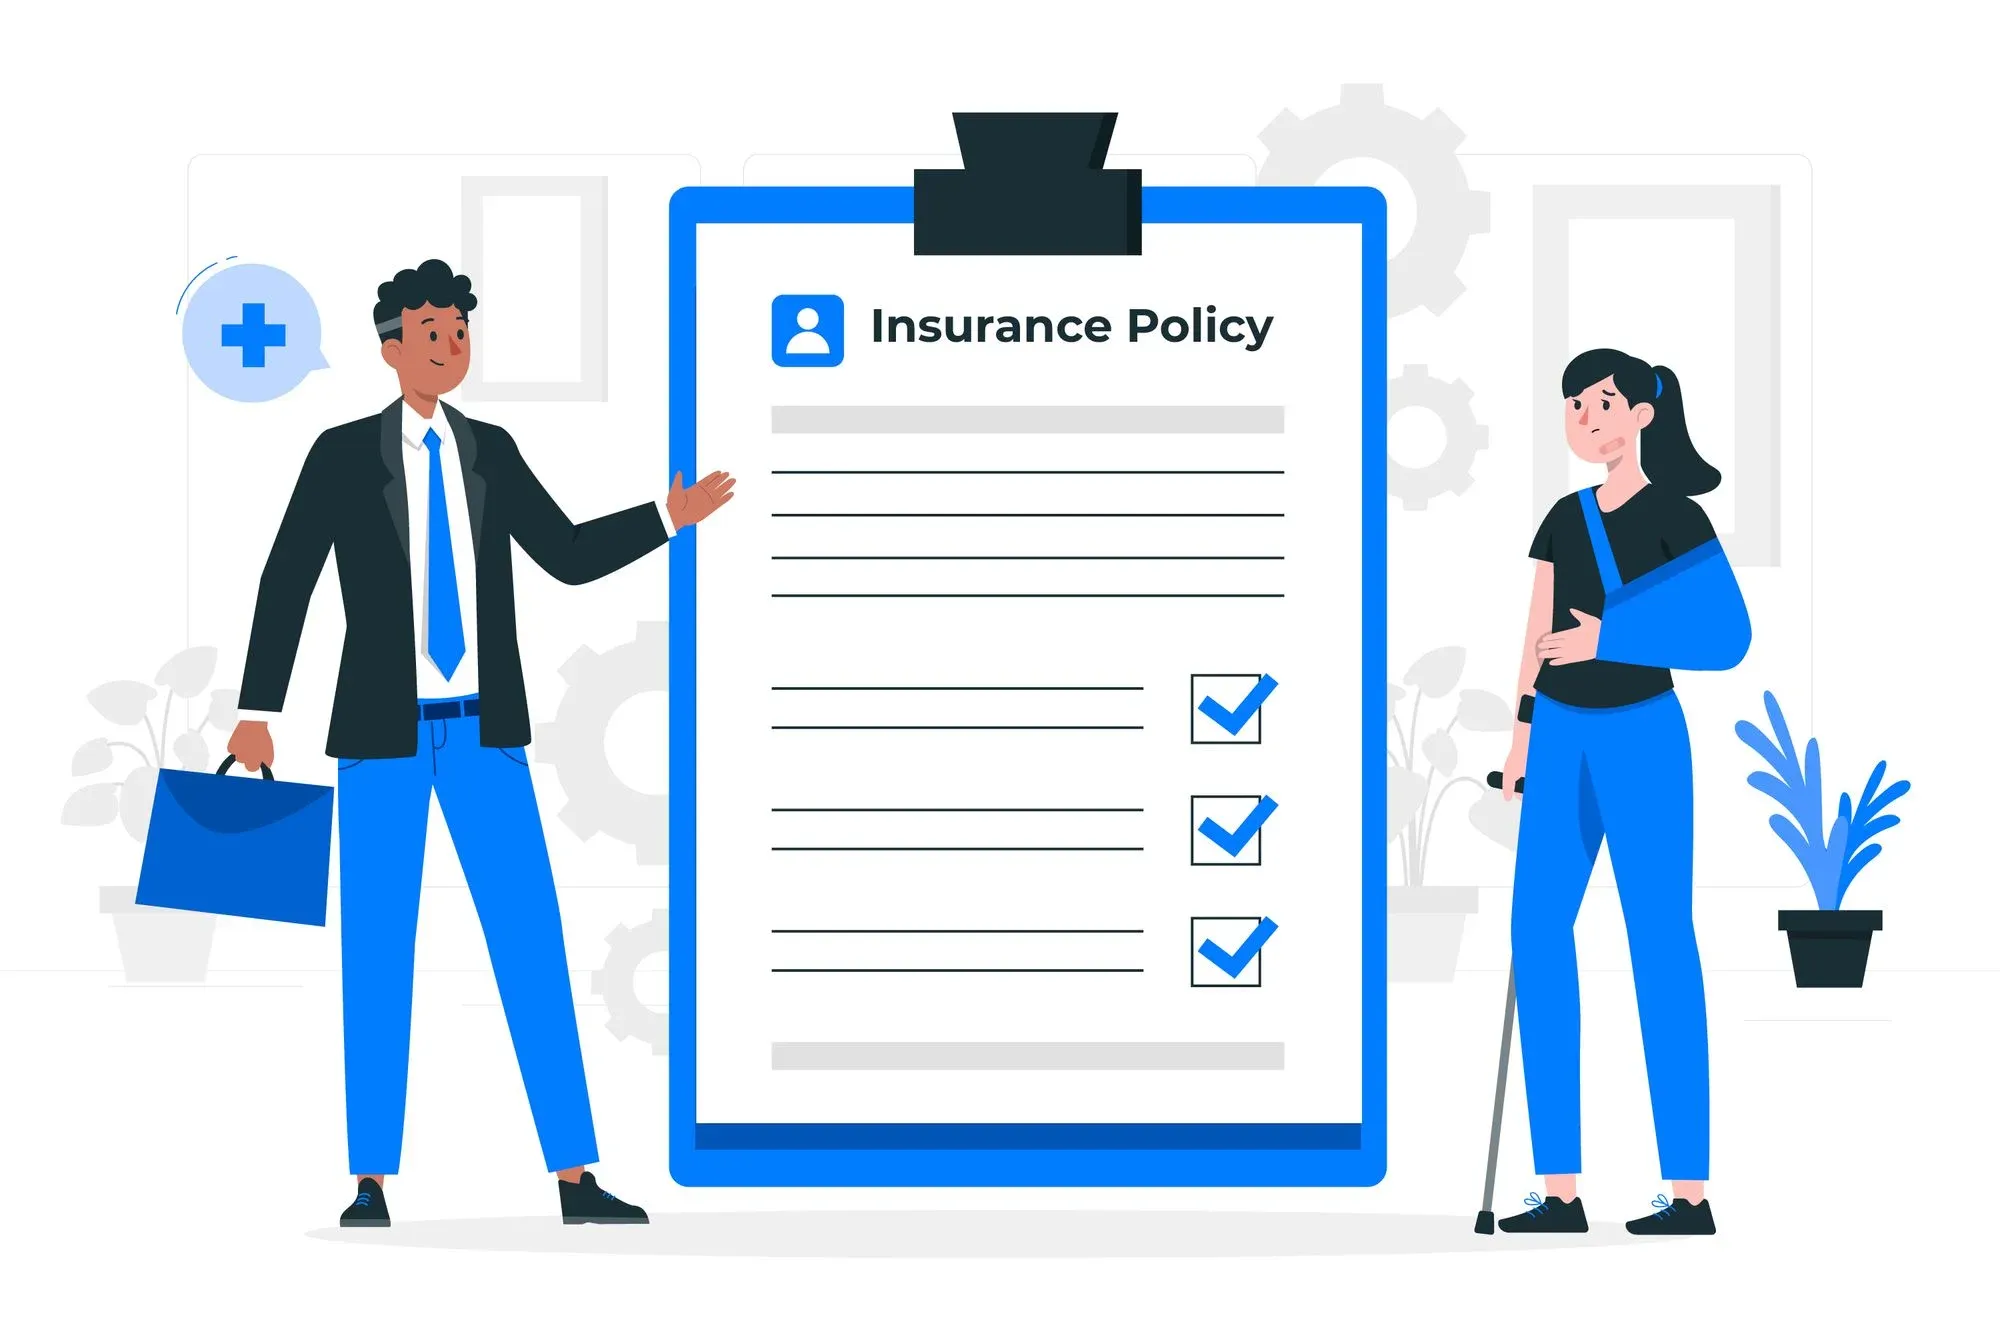 Car insurance - lic policy illustration Free Vector image - Pngfreepic